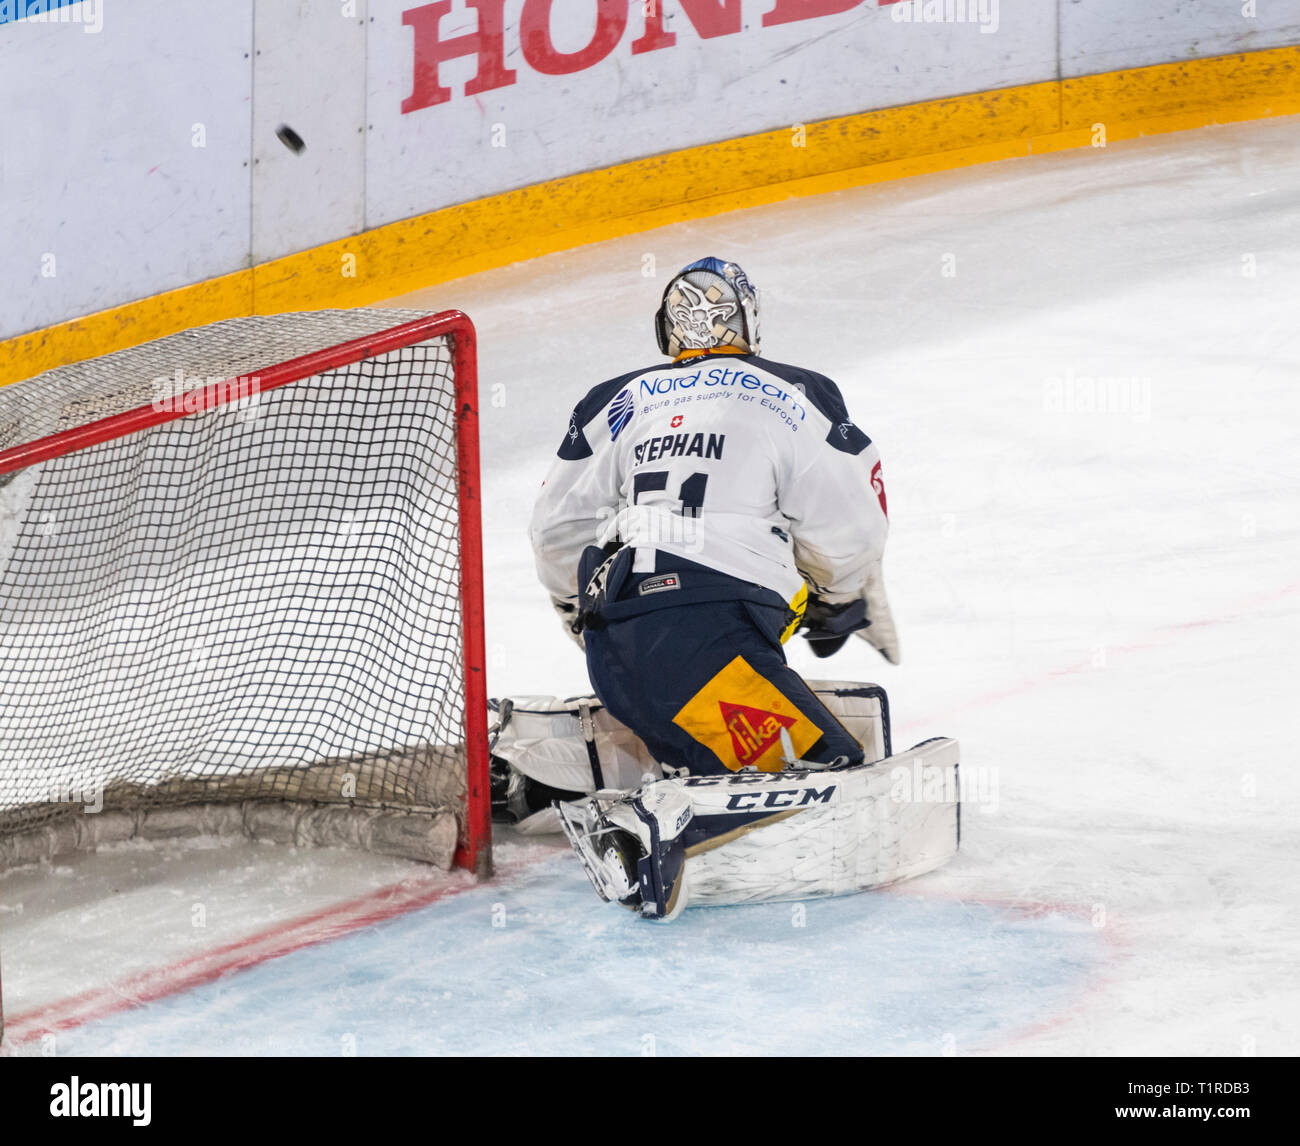 Lausanne, Switzerland. 28th march, 2019. LNA SWISS ICE HOCKEY LAUSANNE HC VS EV ZUG - Lausanne Hc Vs RV Zug at Vaudoise Arena, Lausanne (Playoffs, Semi-final Act II), 28-03-2019. Credit: Eric Dubost/Alamy Live News Stock Photo